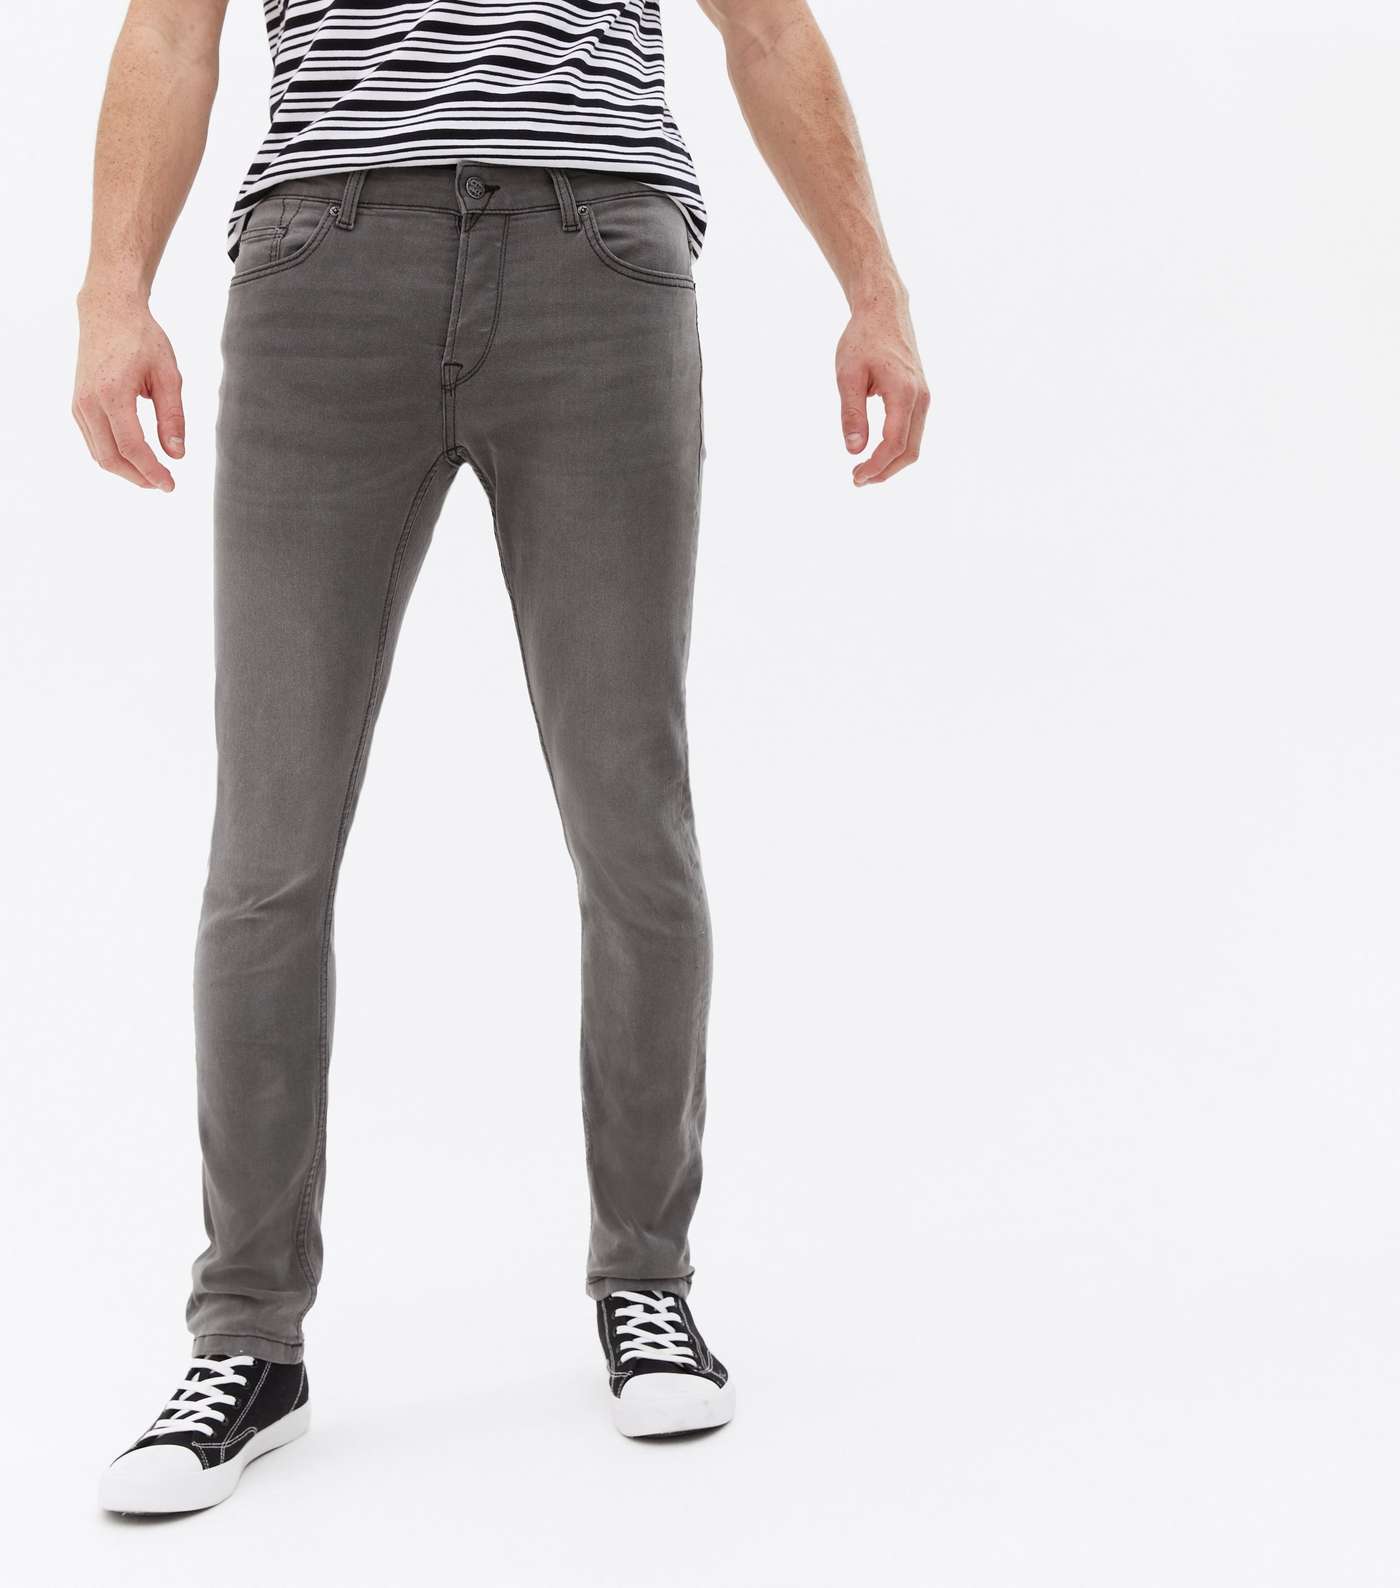 Only & Sons Dark Grey Slim Fit Jeans Image 2